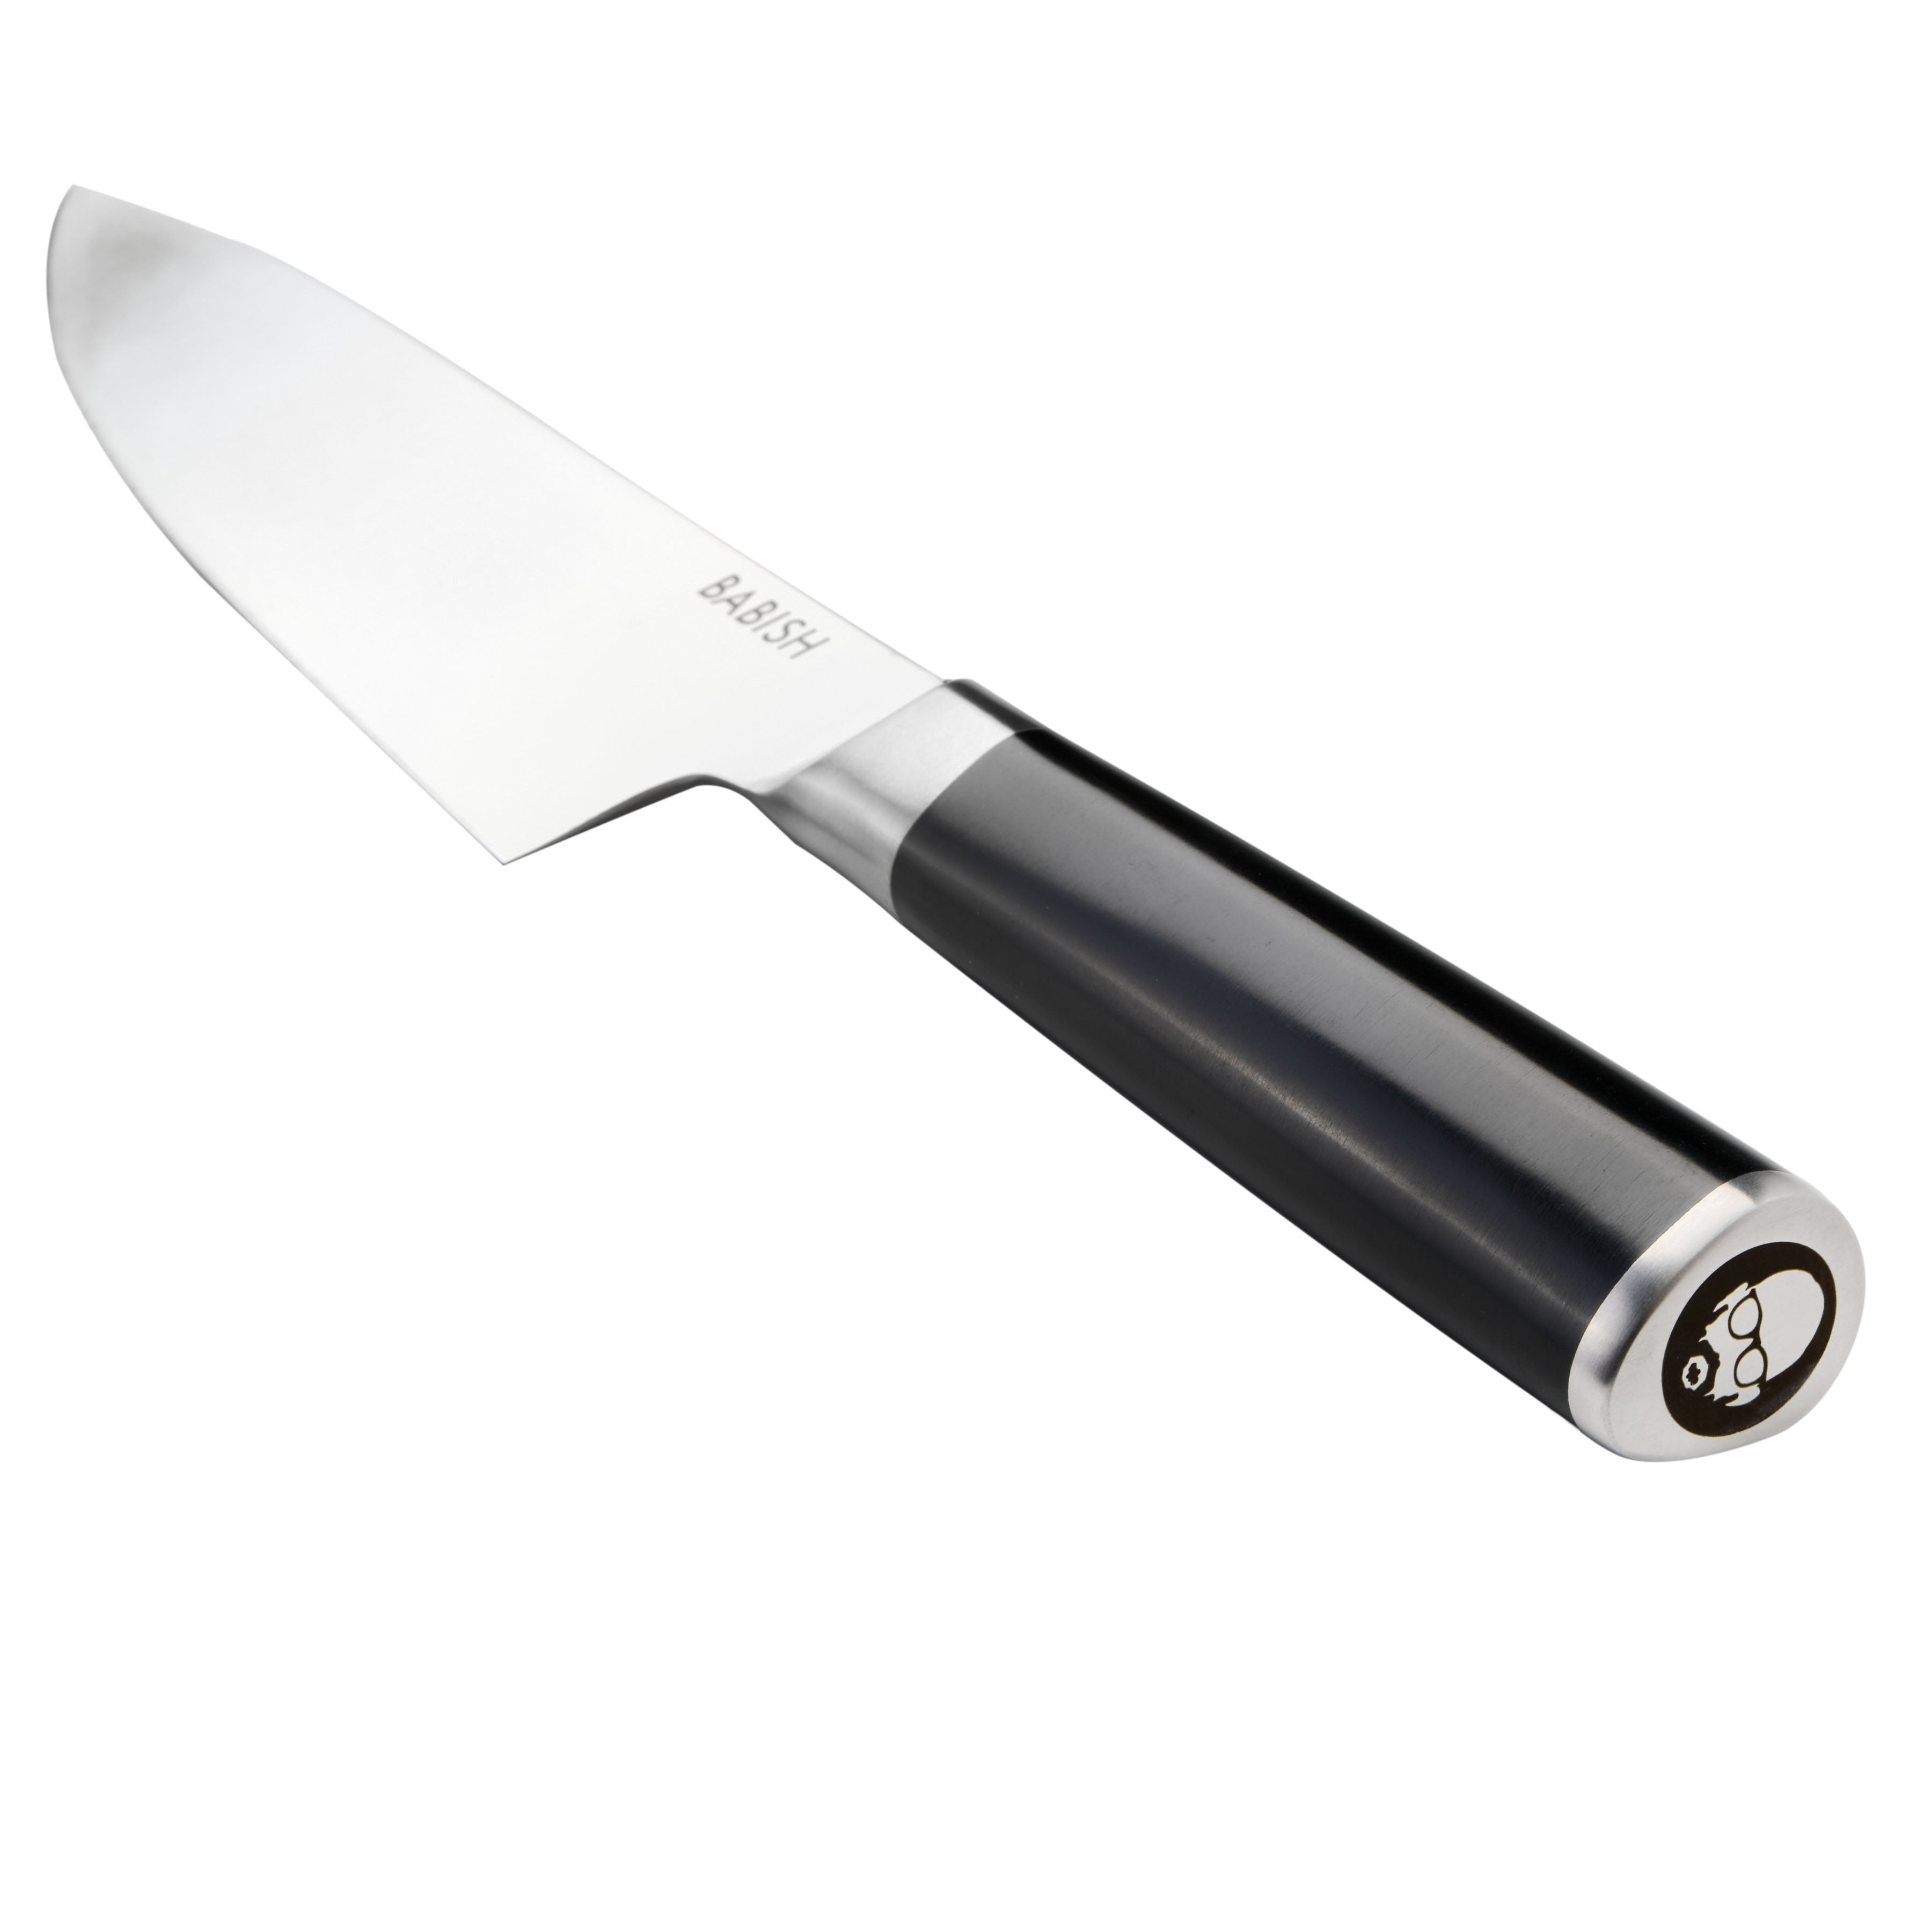 Babish Chef Knife, Stainless Steel, ABS Handle, 8 Inches